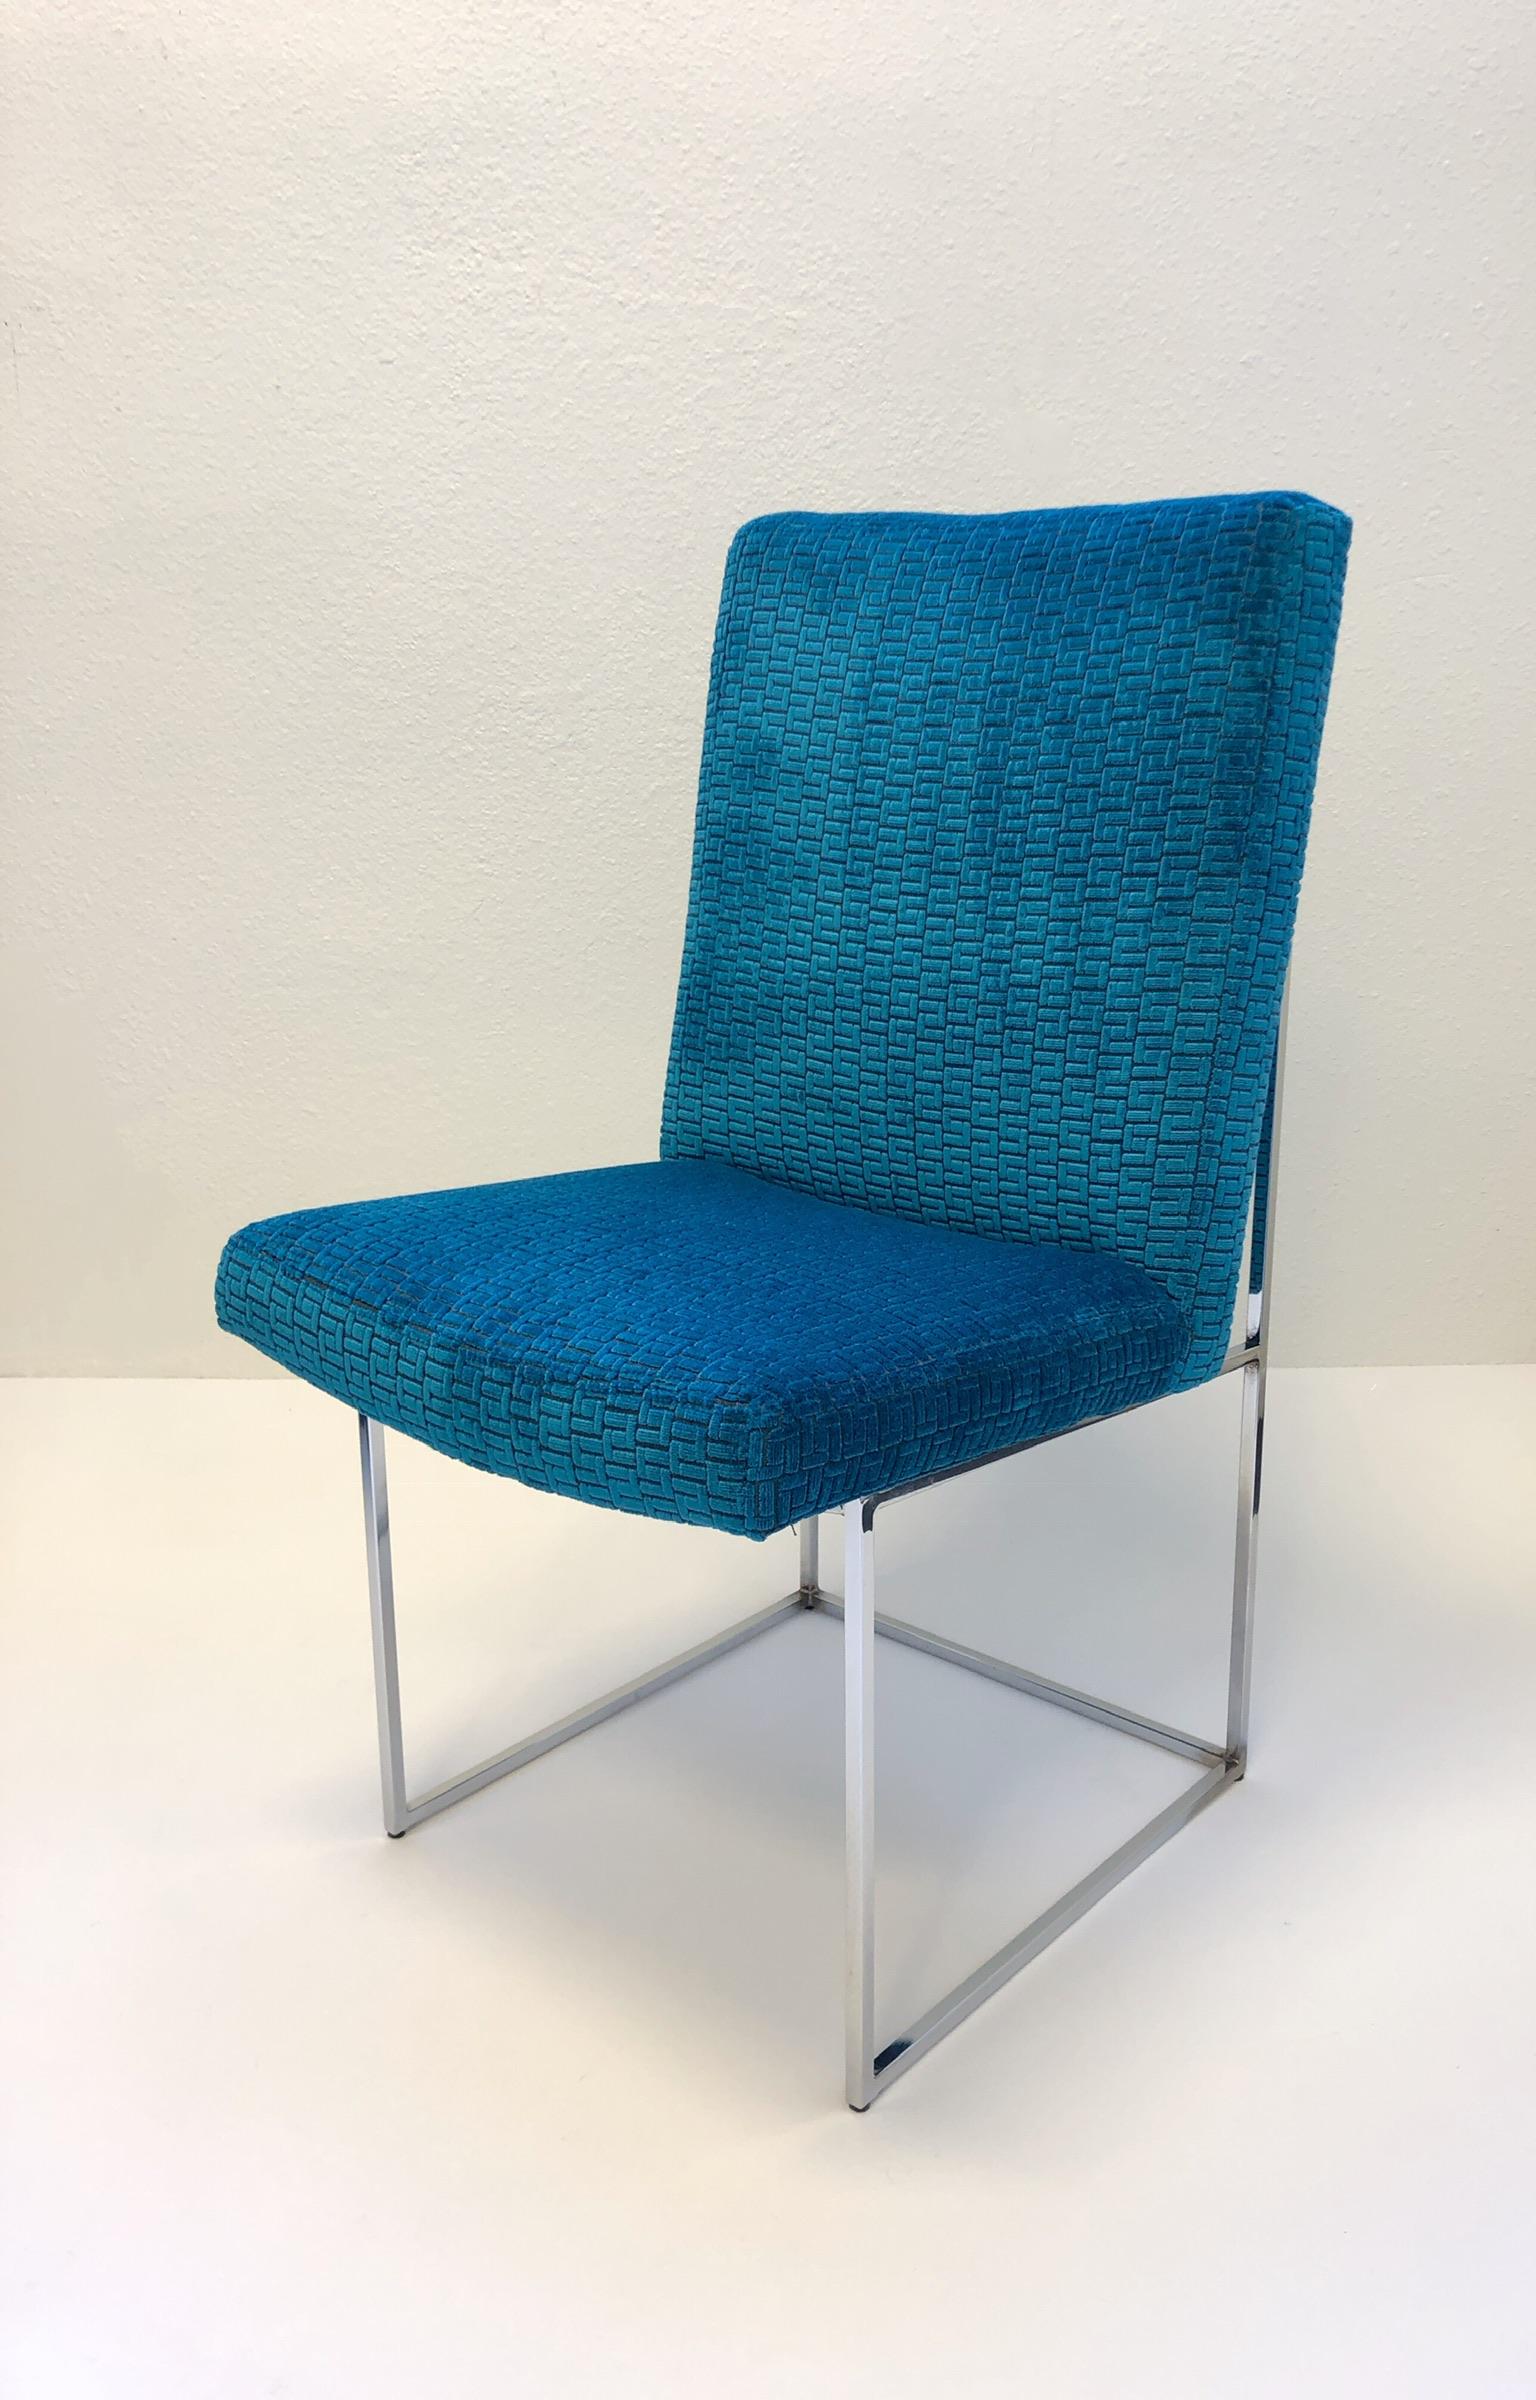 A glamorous set of six polish chrome”Thin Line” dining chairs Desin by Milo Baughman for Thayer Coggin in the 1970s. The chairs have been newly recovered in a soft dark turquoise burn out velvet with a S pattern design (see detail photos). We have a